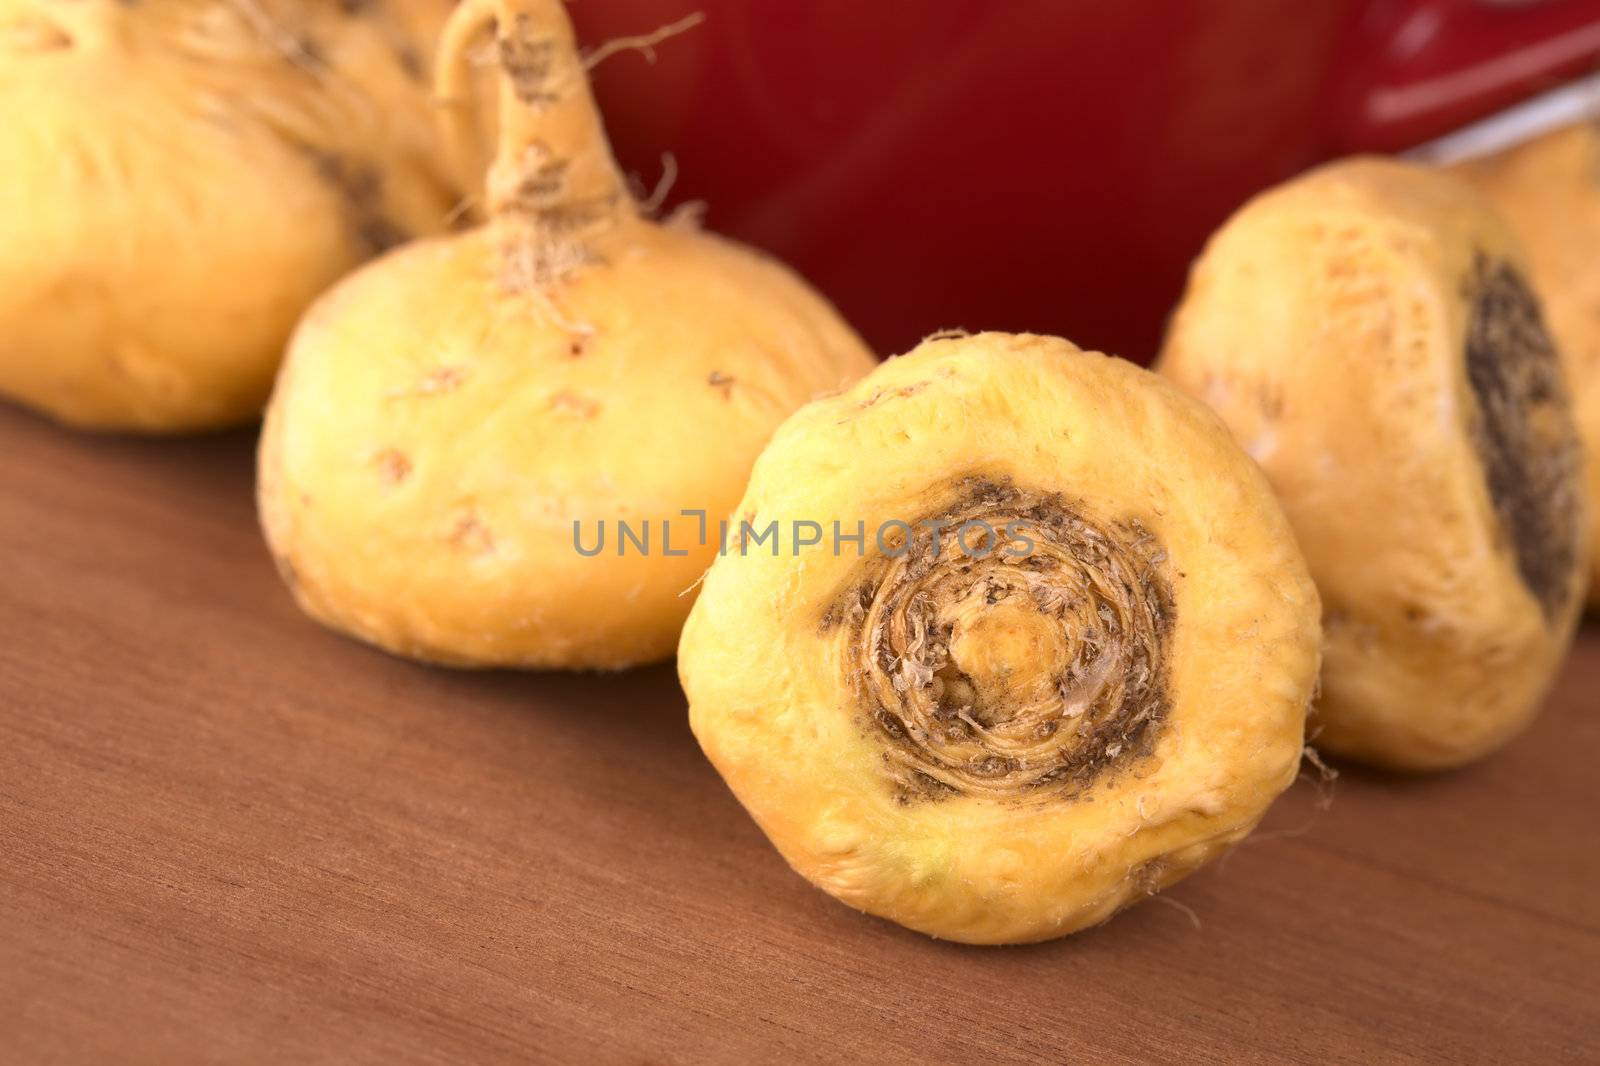 Peruvian Ginseng (Sp. Maca, lat. Lepidium meyenii) which is widely used in Peru for its various health effects and high nutritional value with a red tea cup in the back on wood (Selective Focus, Focus on the front root)